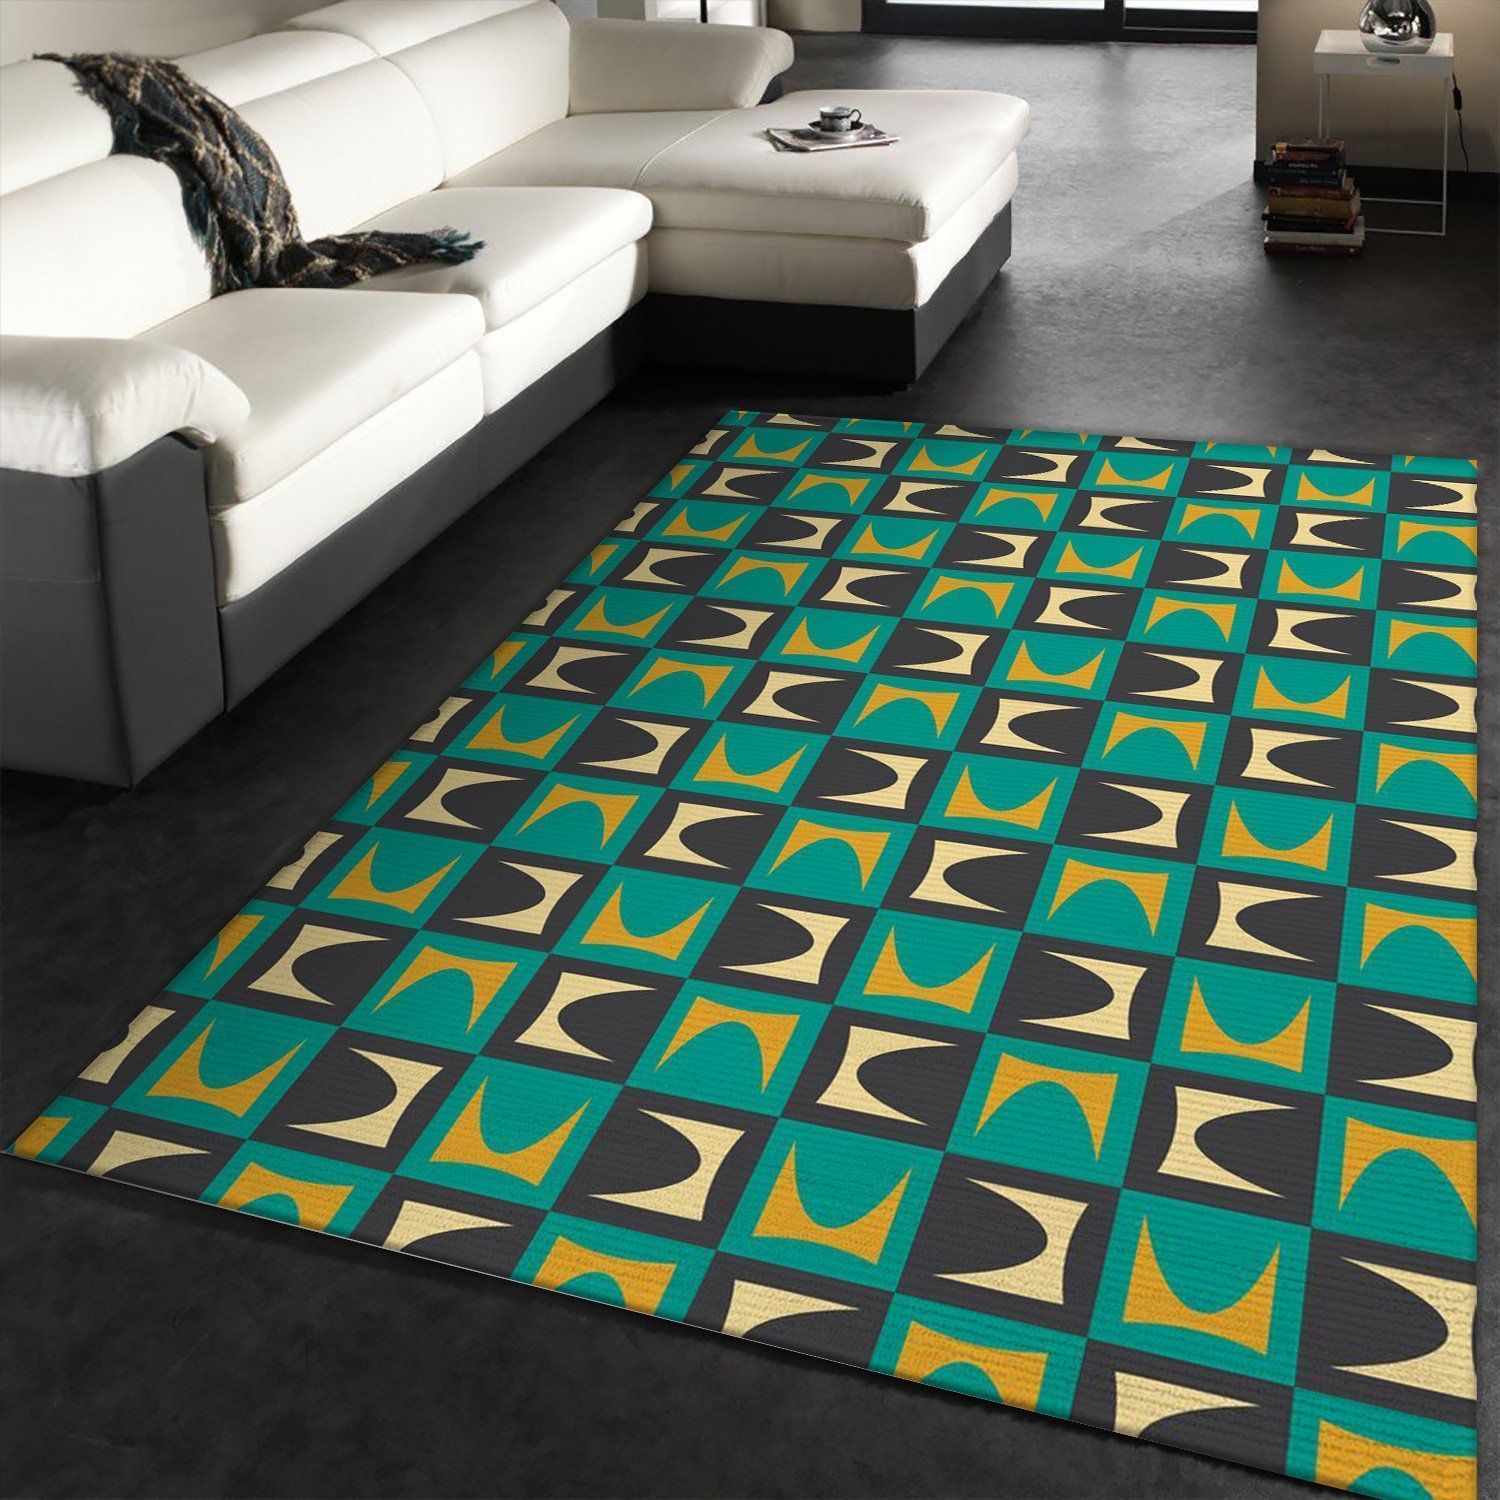 Midcentury Pattern 34 Area Rug, Living room and bedroom Rug, Family Gift US Decor - Indoor Outdoor Rugs